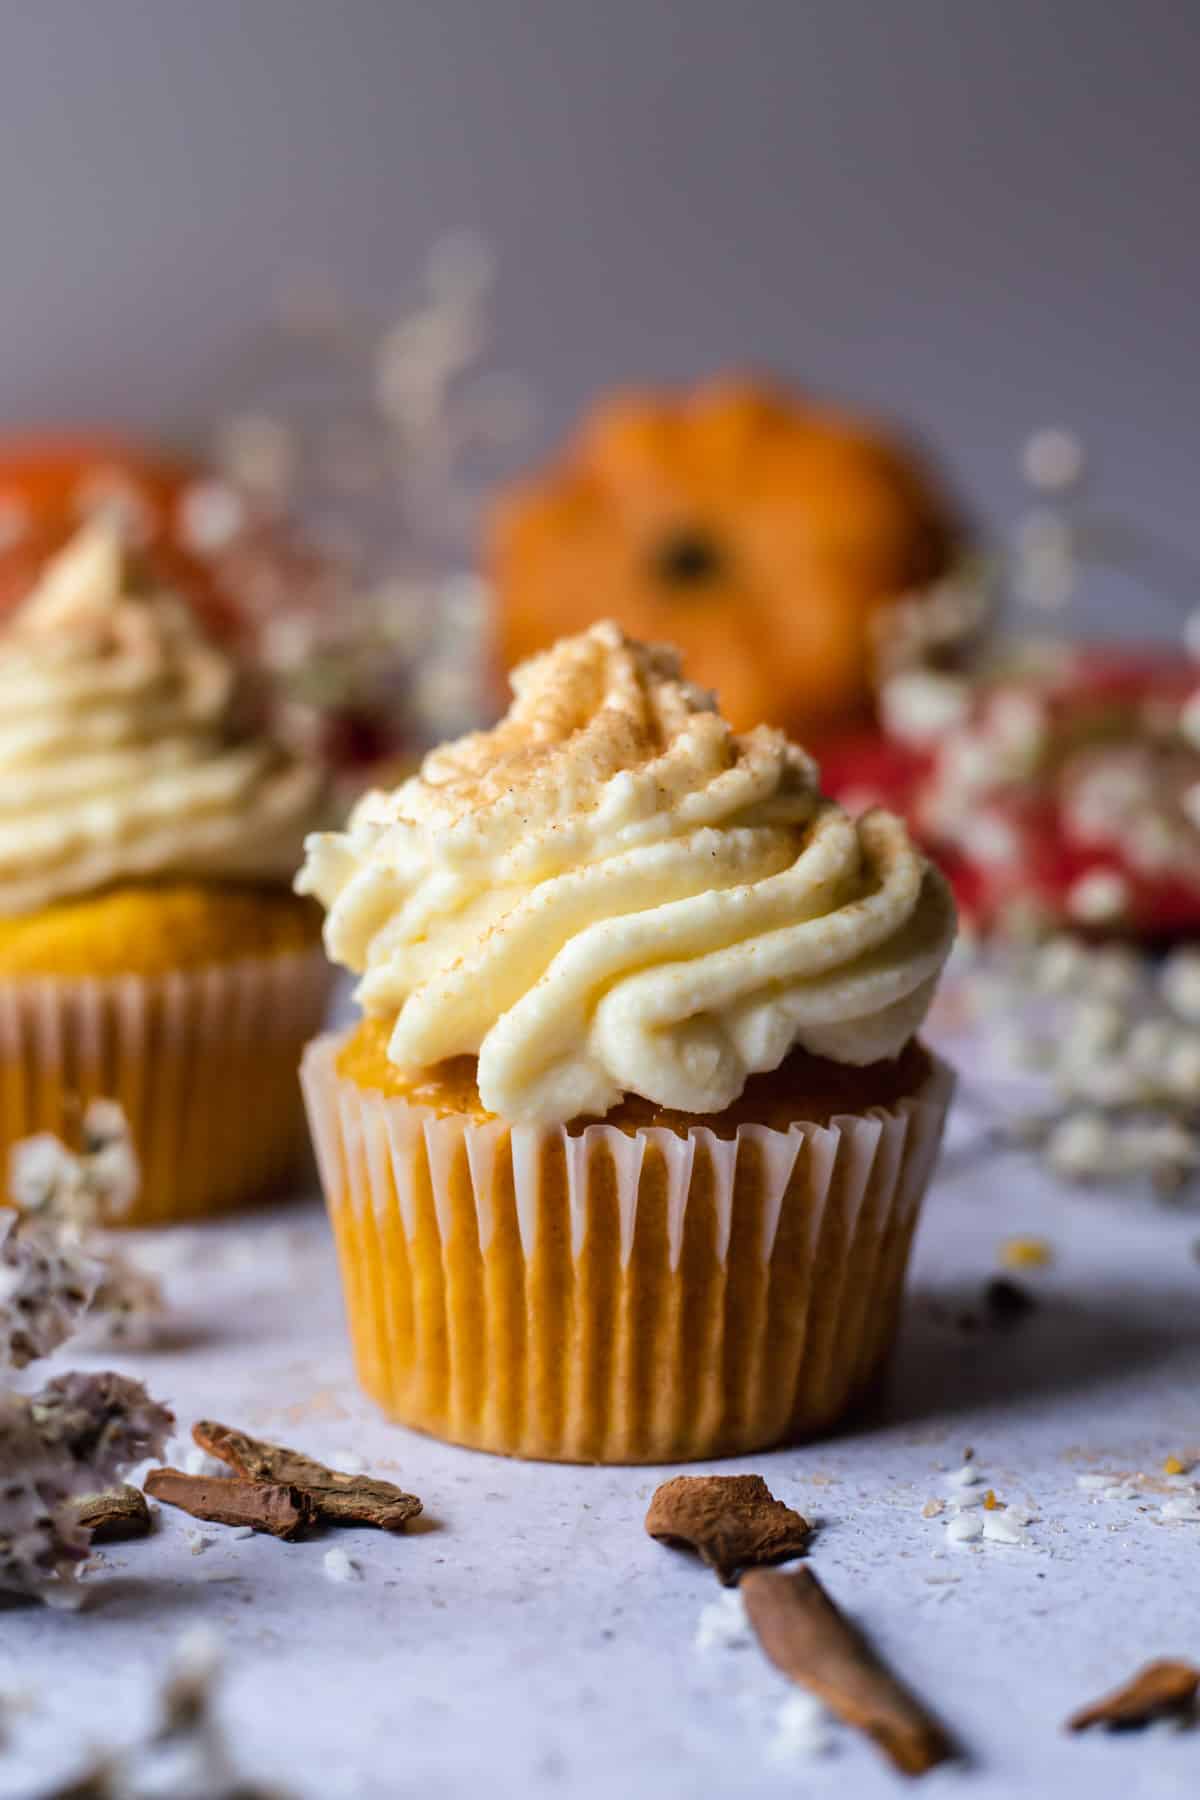 Shot of a single cupcake on white table with orange pumpkin in the background.